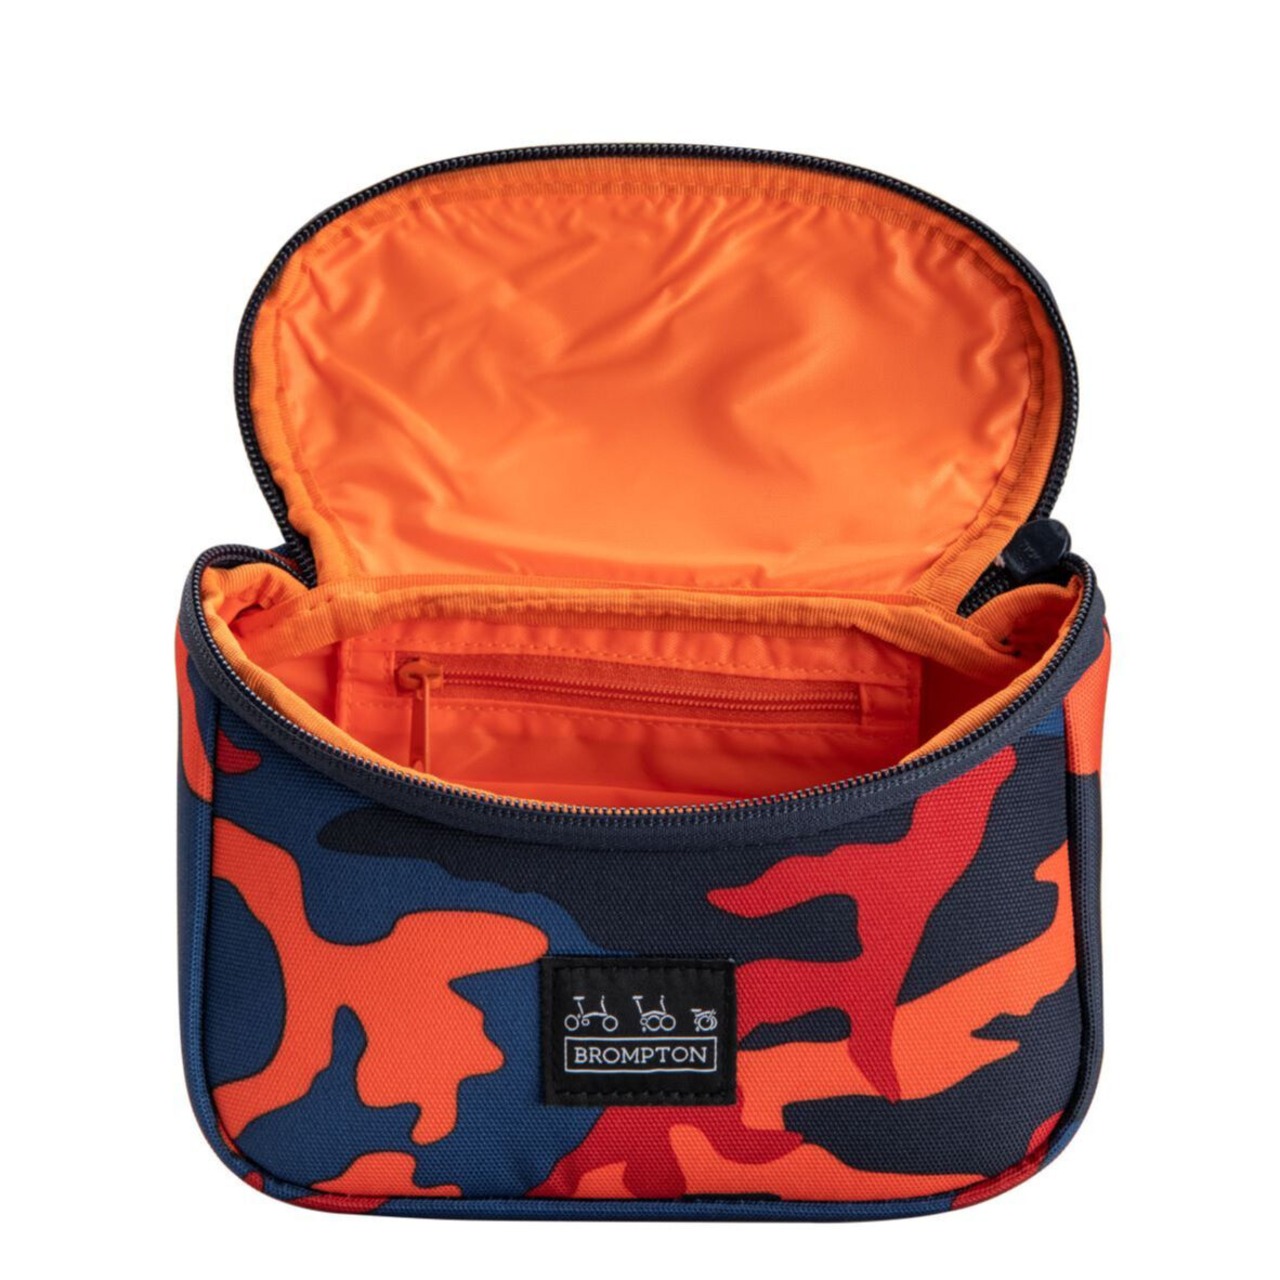 【DPM Print Luggage Collection 2022】Zip Pouch XB 1L Camo